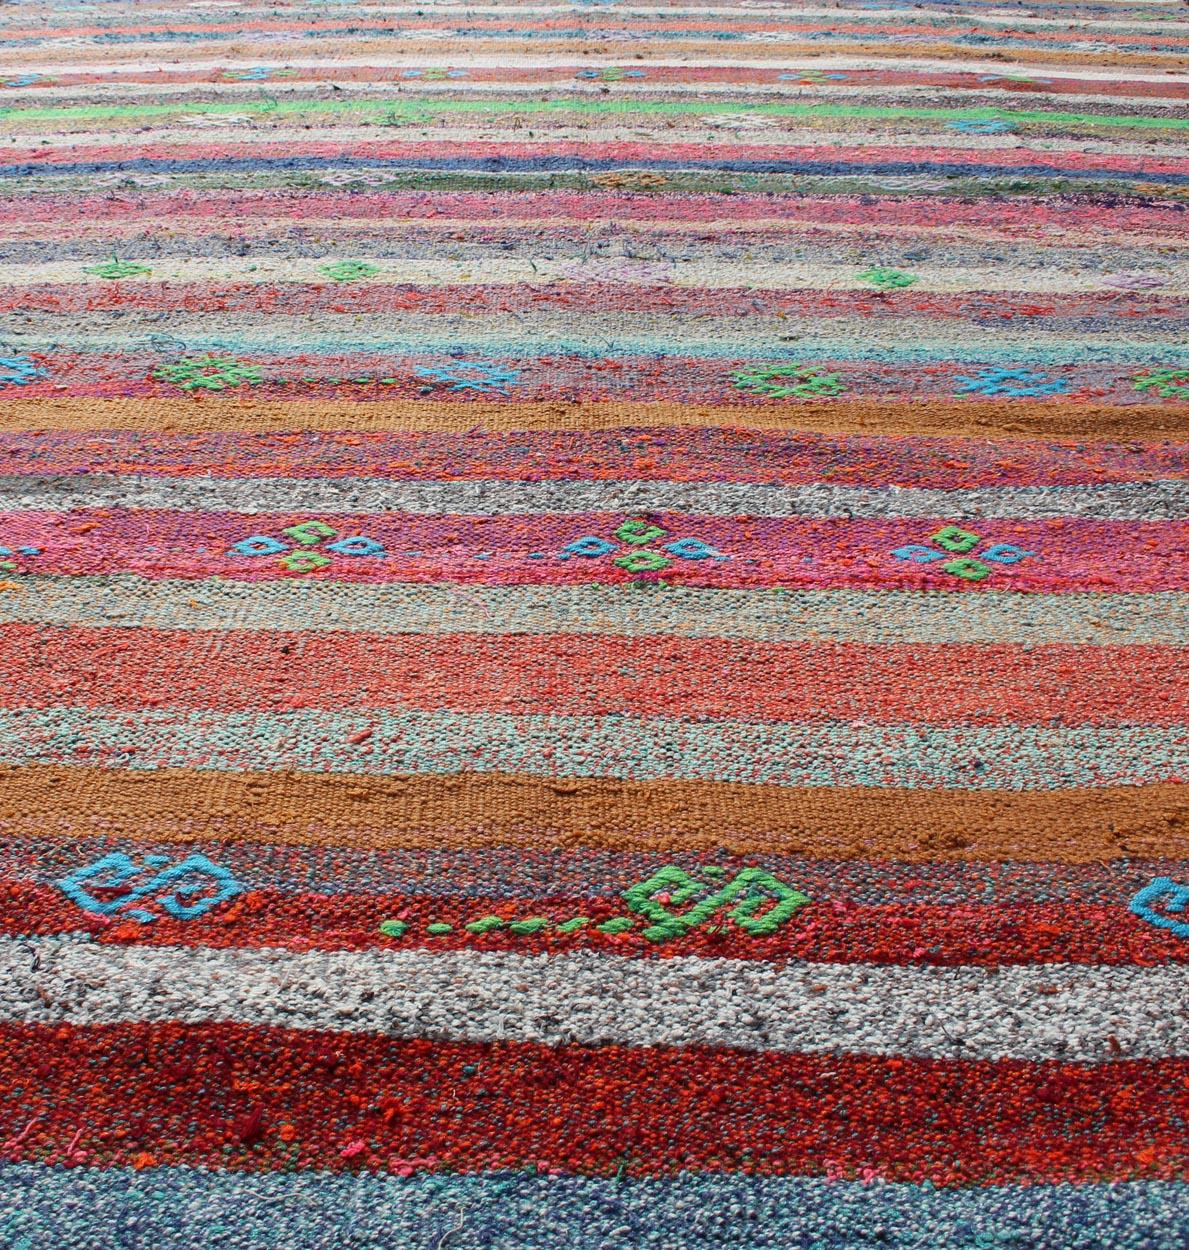 Vintage Turkish Kilim Flat-Weave Rug with Colorful Strips in Bright Colors In Excellent Condition For Sale In Atlanta, GA